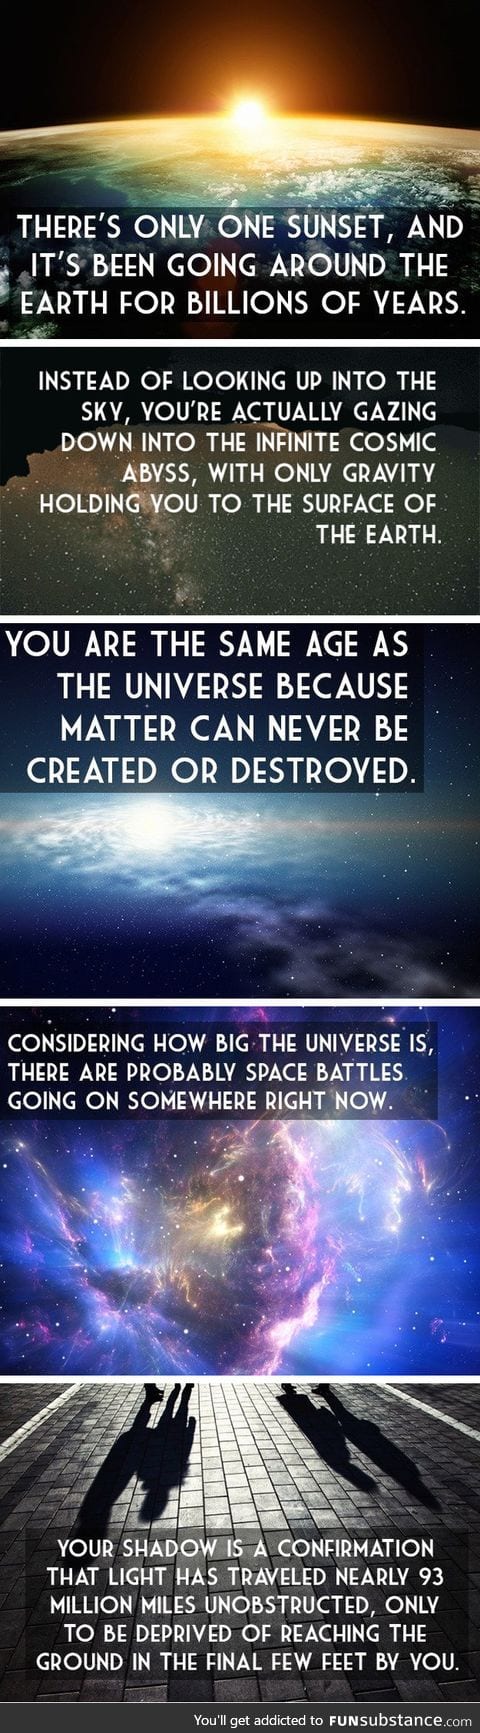 Put our universe into perspective